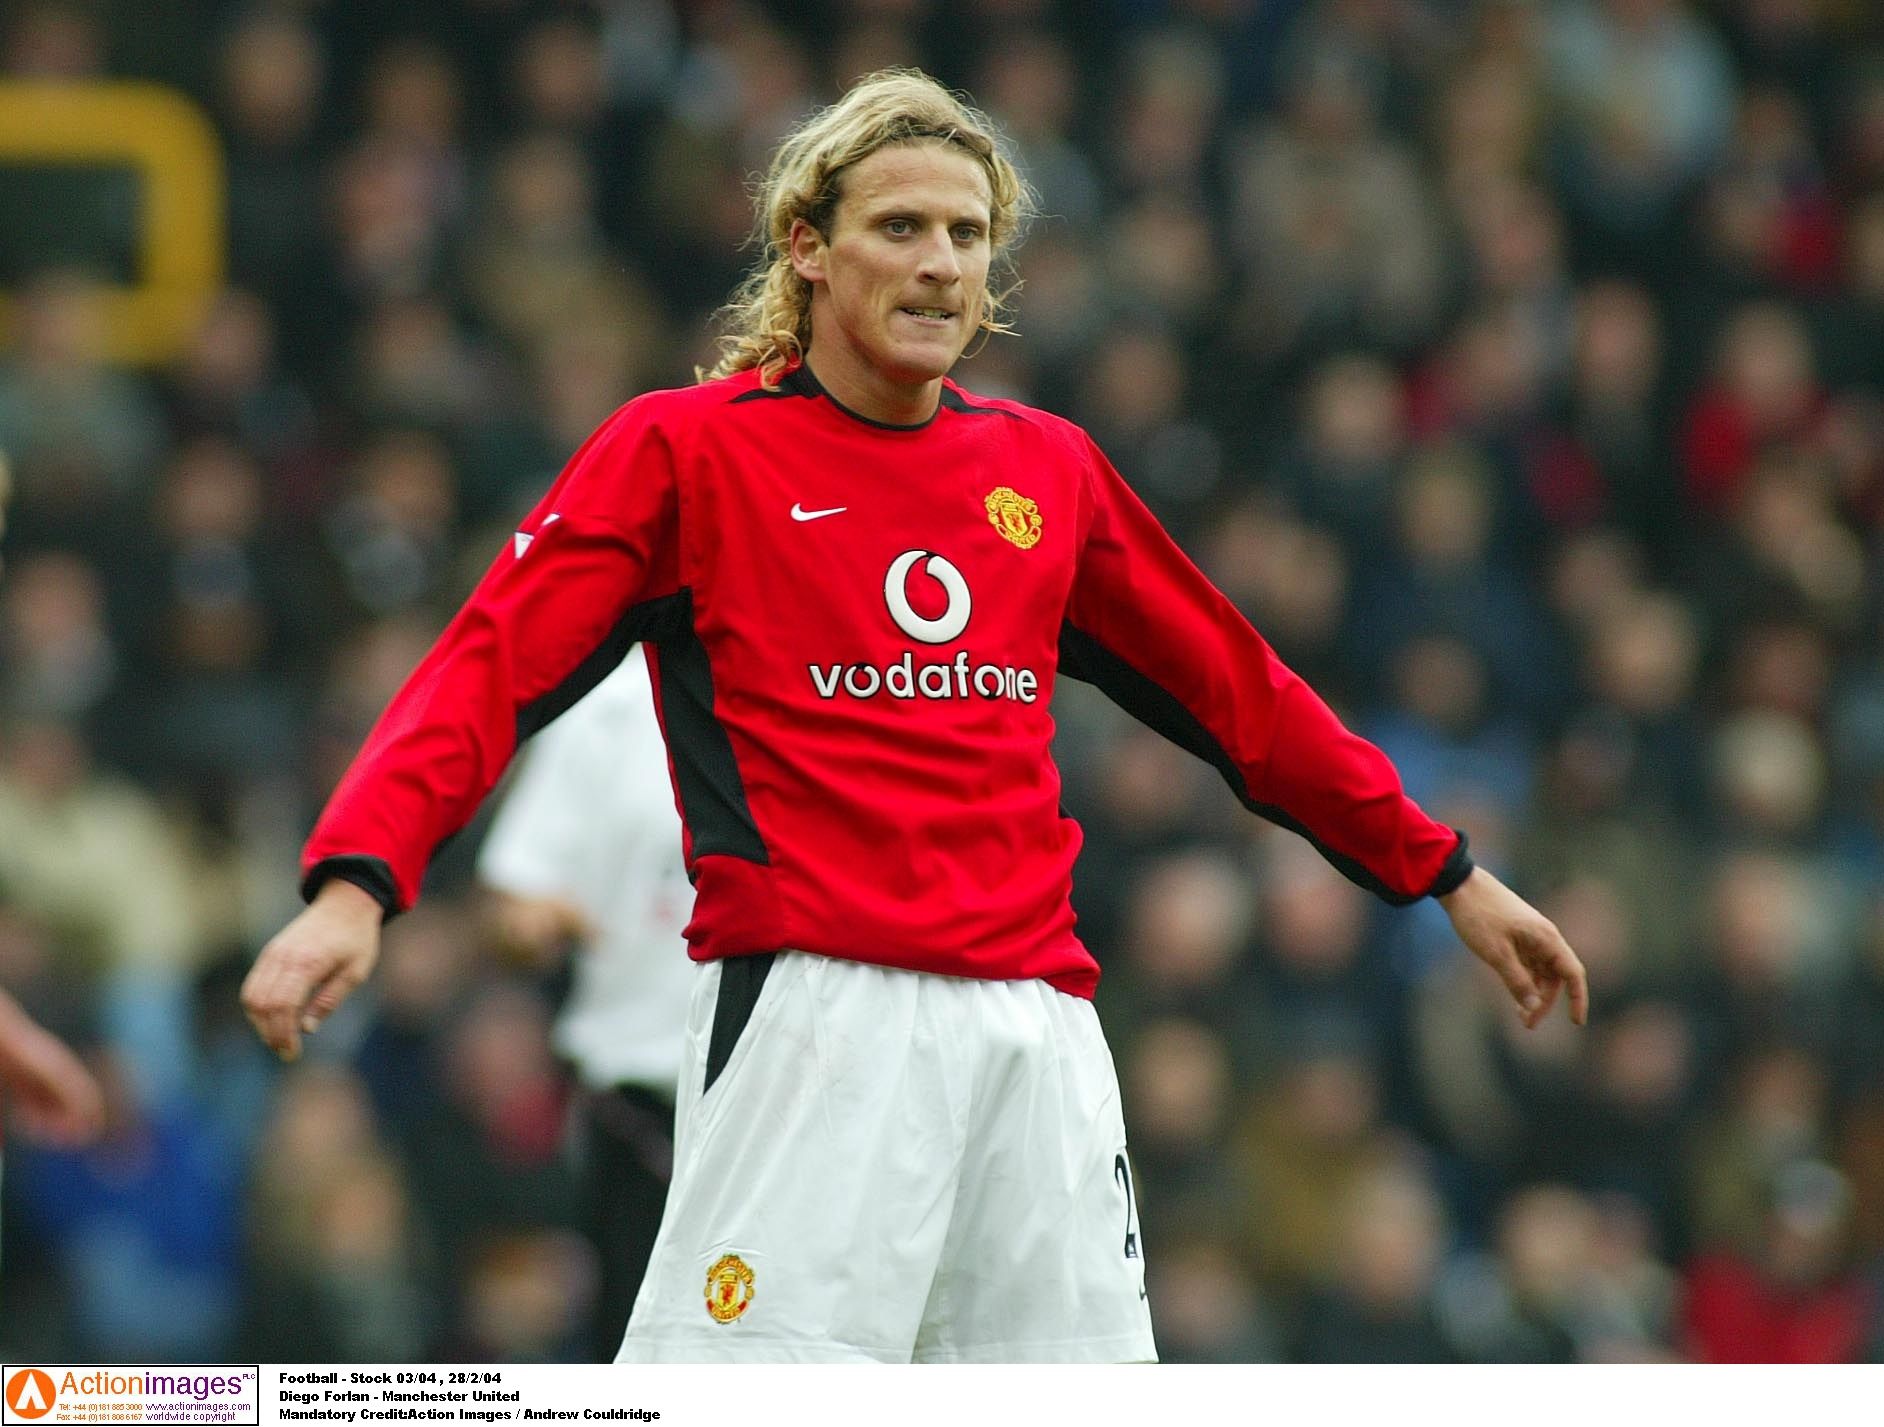 Football - Stock 03/04 , 28/2/04 
Diego Forlan - Manchester United   
Mandatory Credit:Action Images / Andrew Couldridge